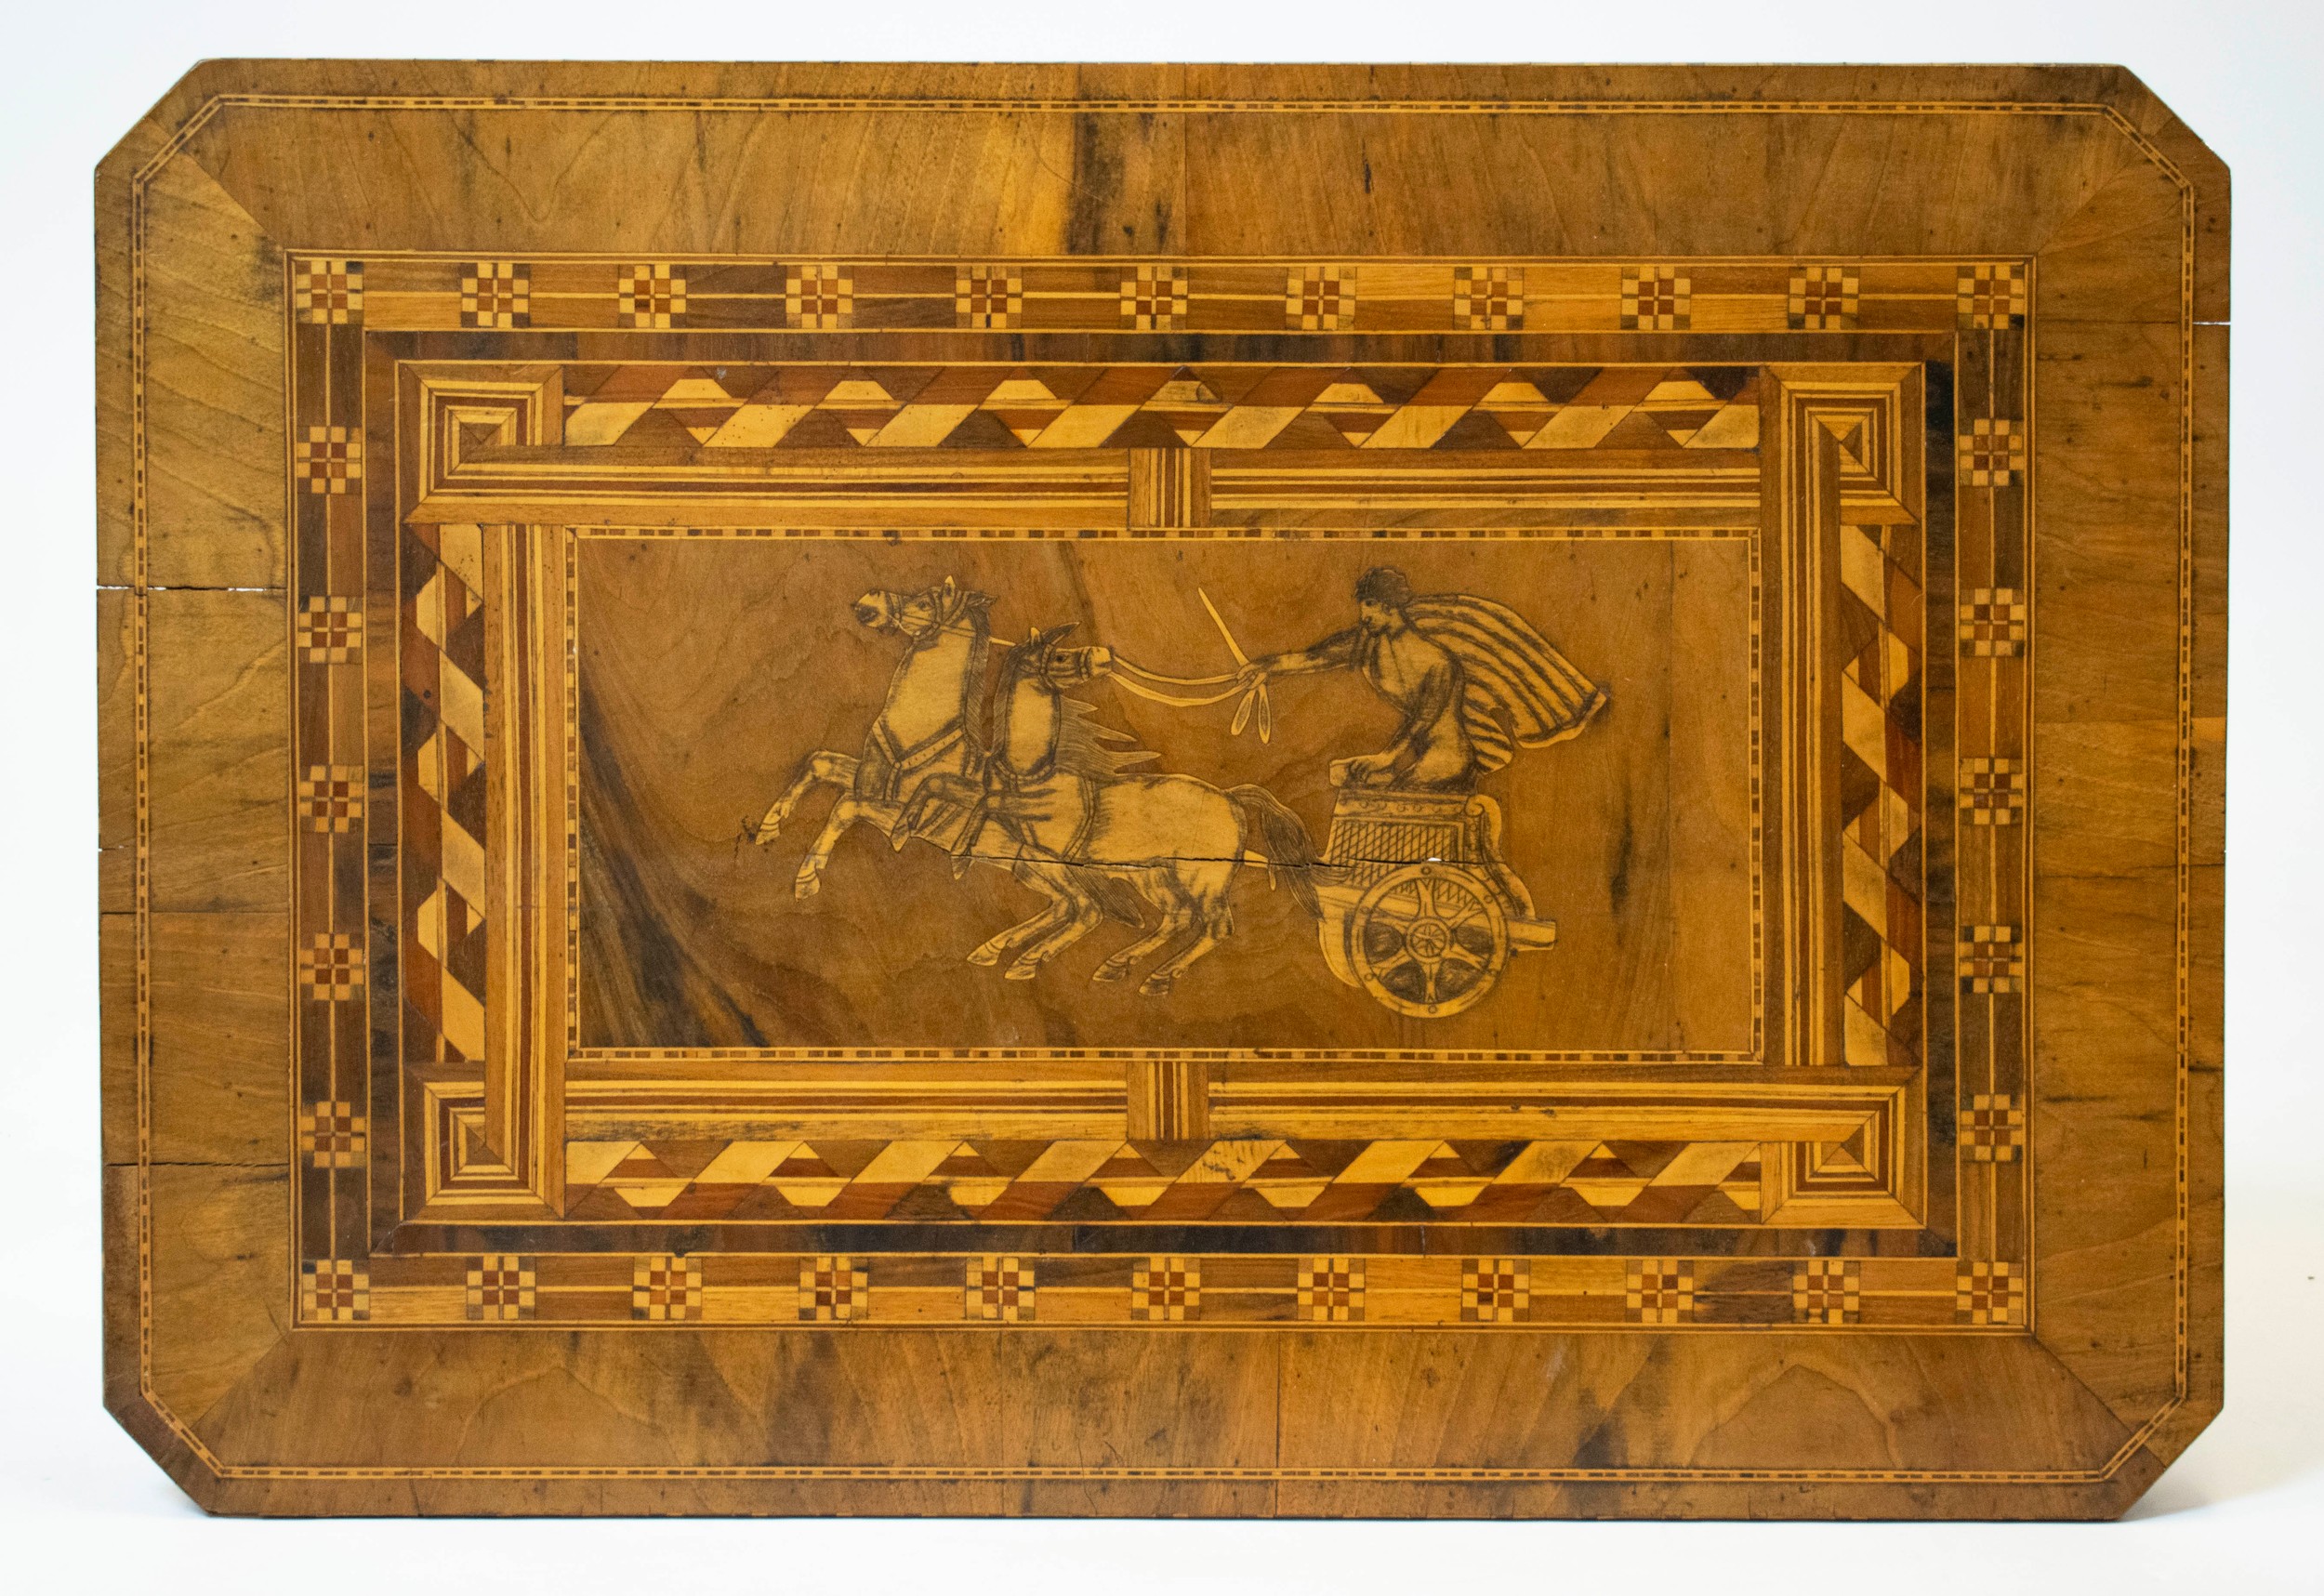 CENTRE TABLE, 76cm H x 80cm x 55cm D, 19th century Italian walnut, marquetry and parquetry. - Image 2 of 5